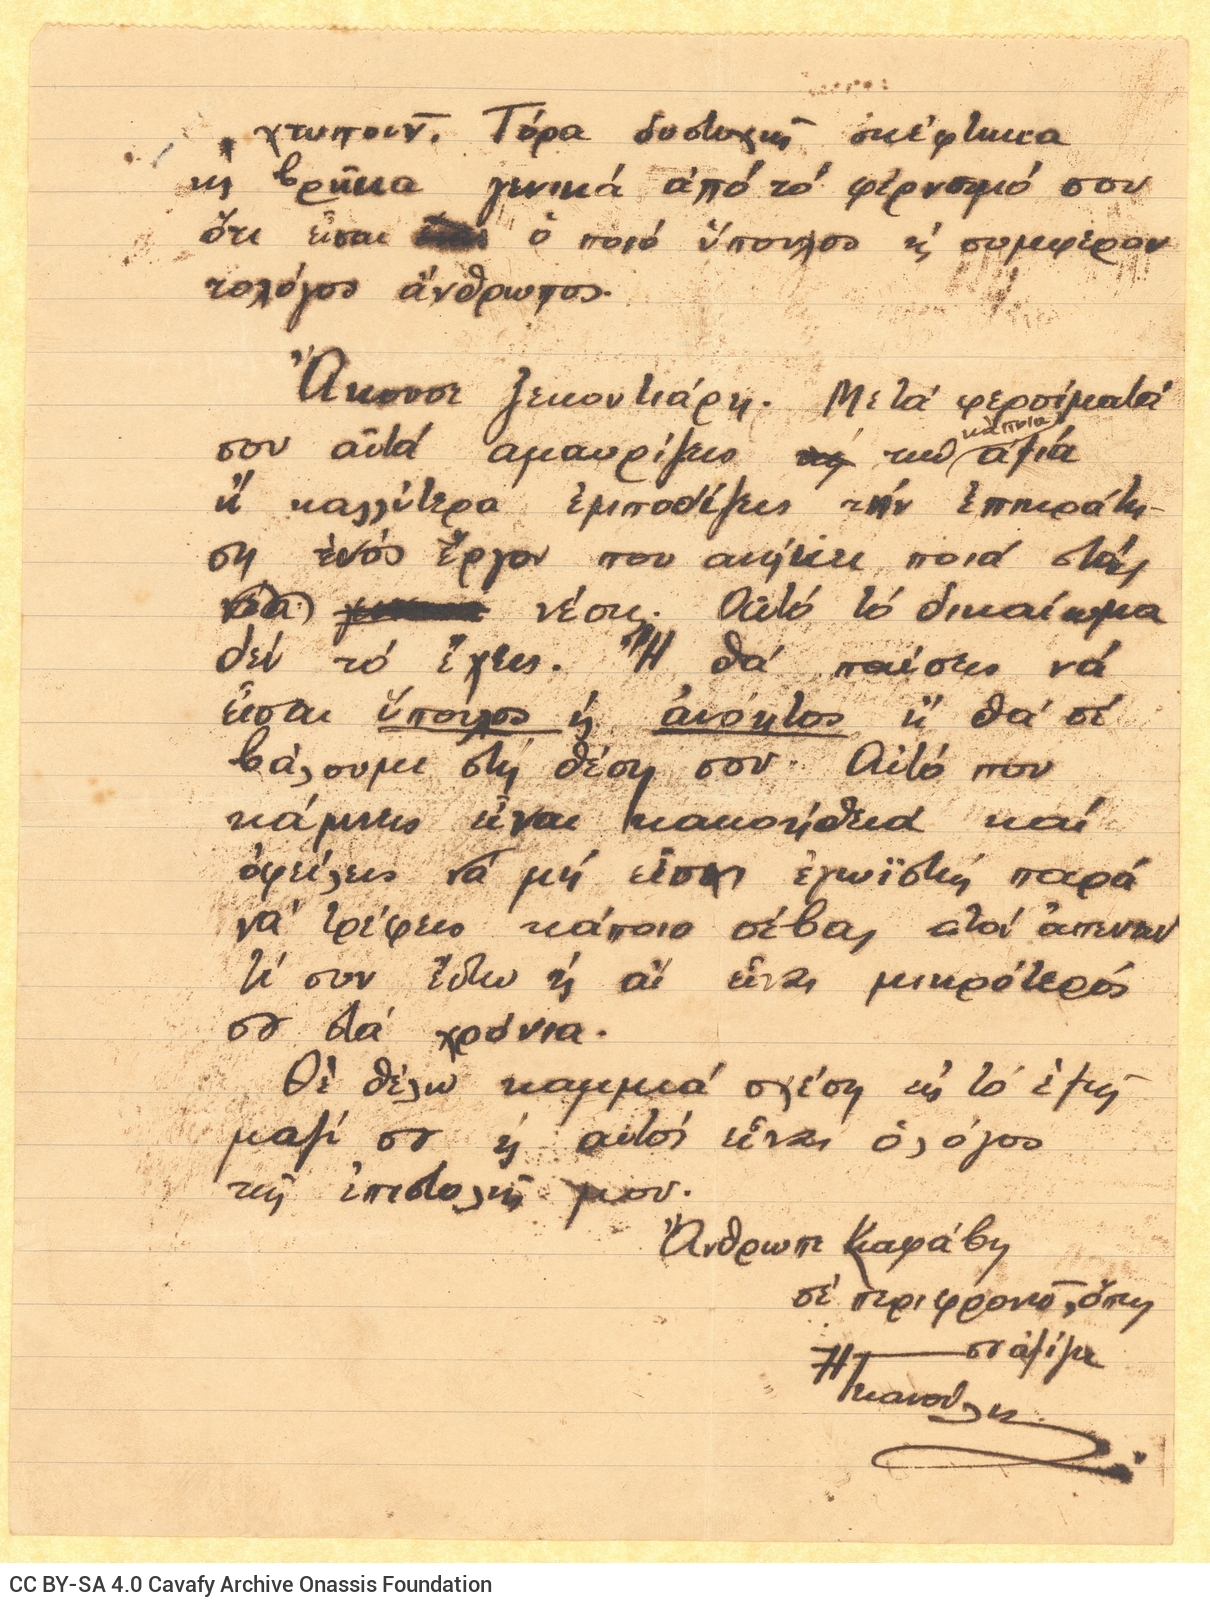 Handwritten letter by Ilias Gkanoulis to Cavafy on the recto of two sheets. The author expresses himself negatively about Cav